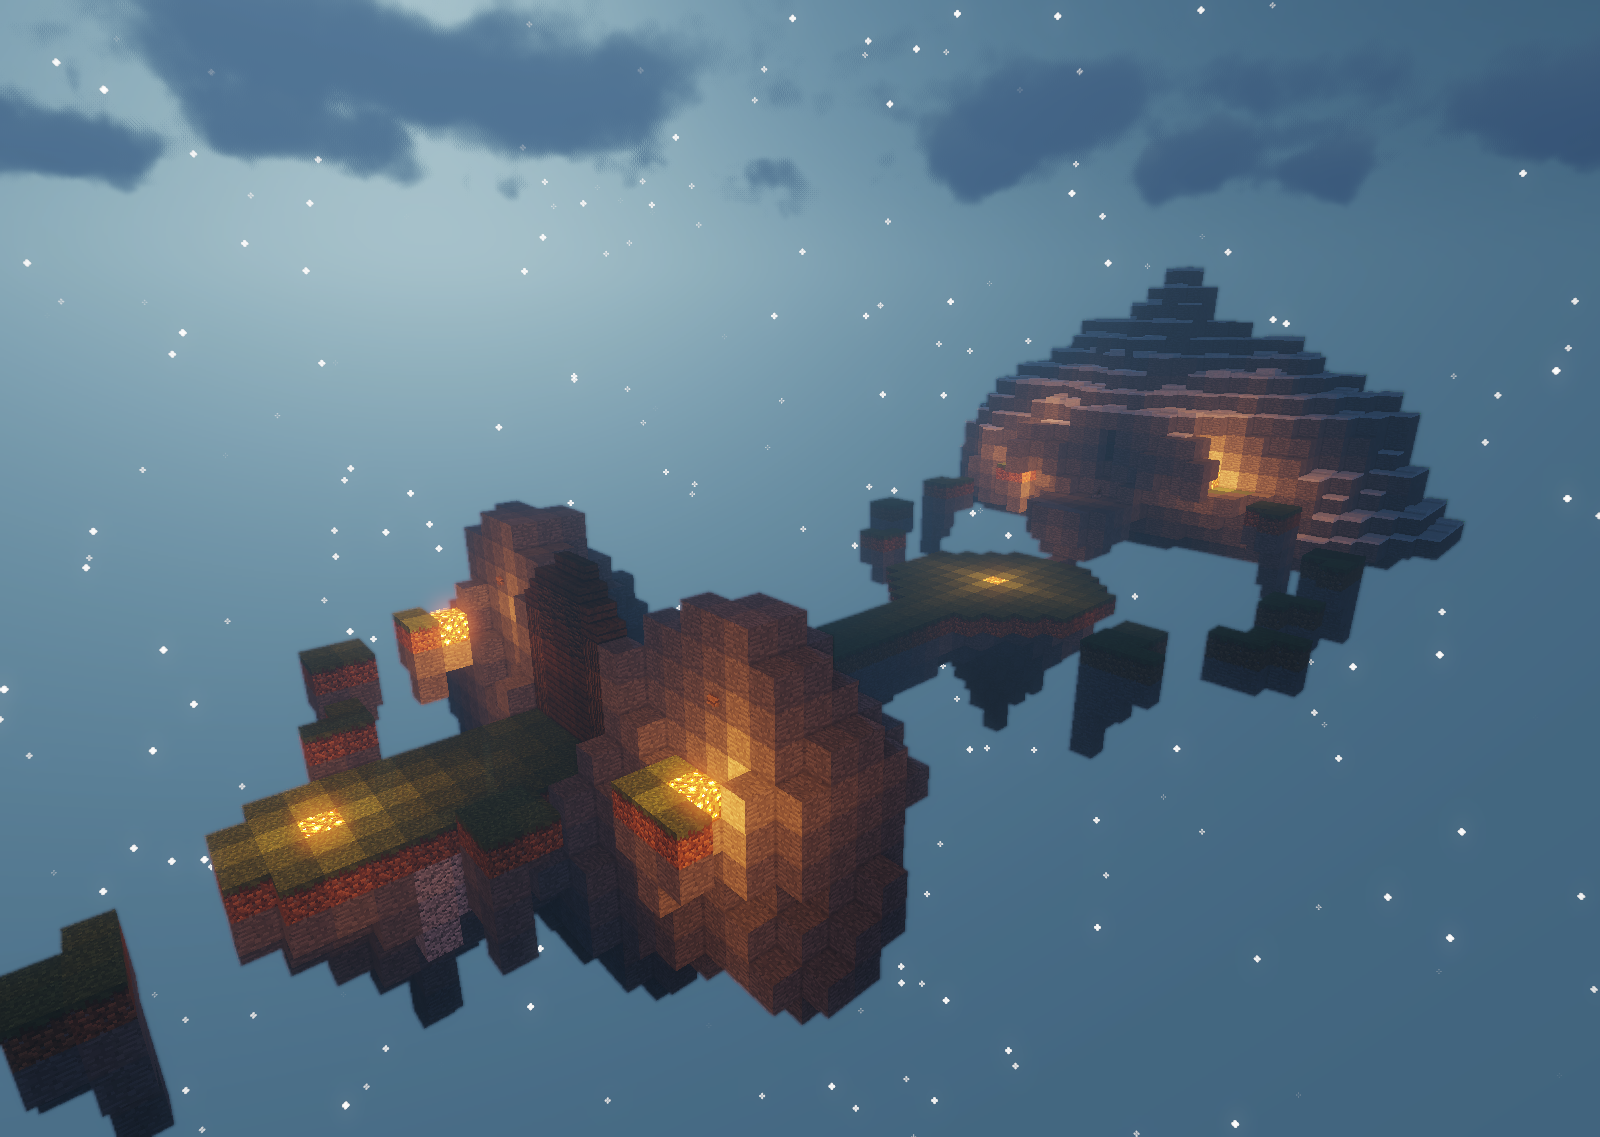 Download Astral Adventure for Minecraft 1.14.2